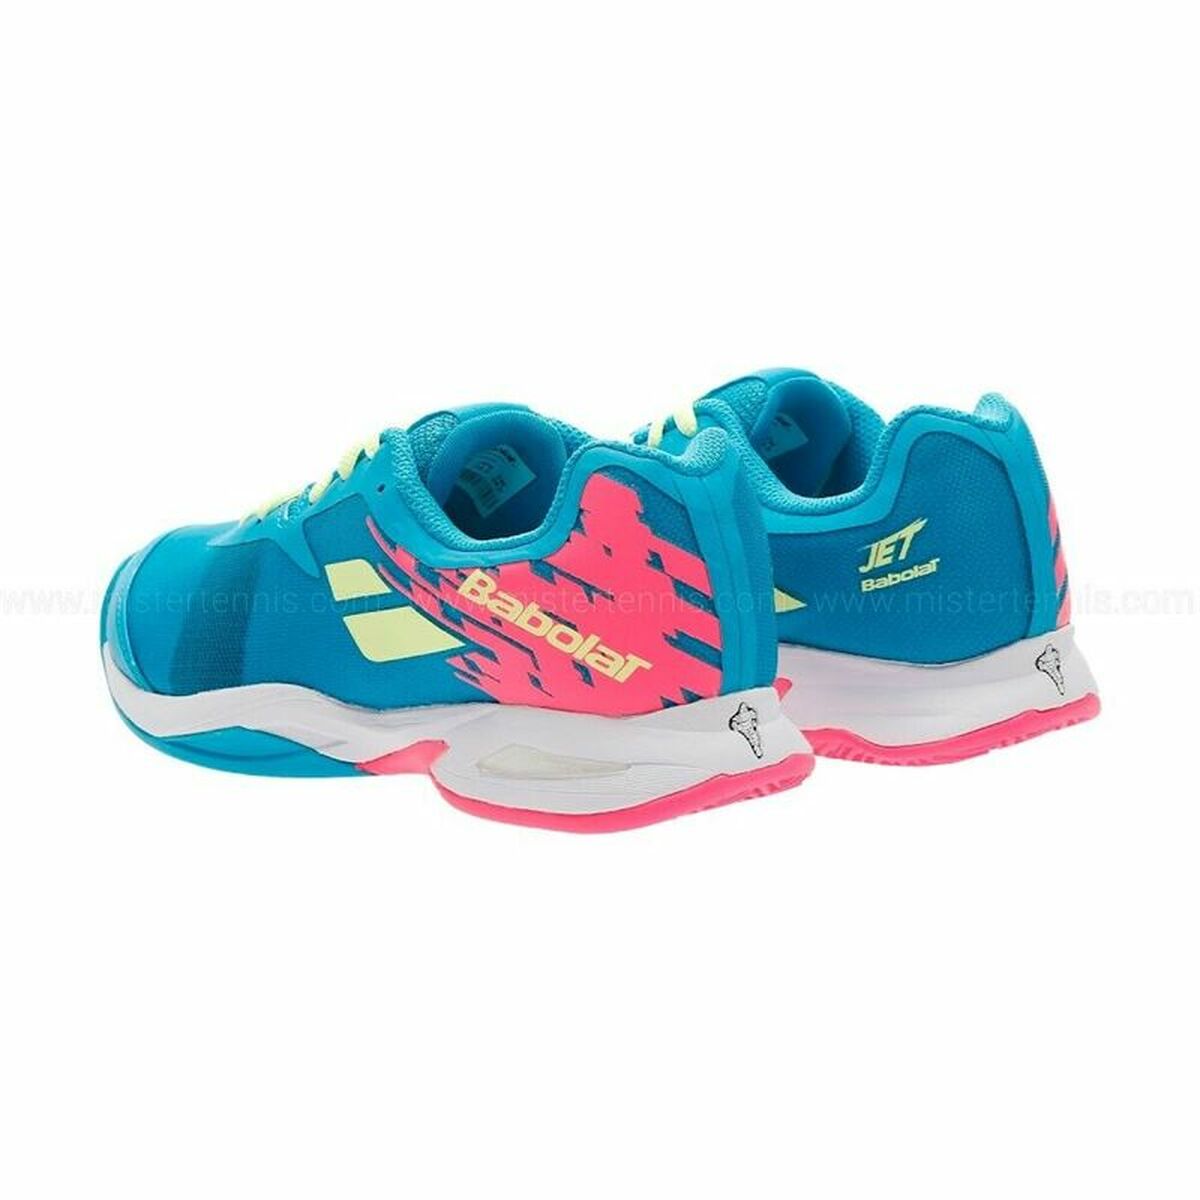 Children's Padel Trainers Babolat Jet Clay Sky blue Unisex